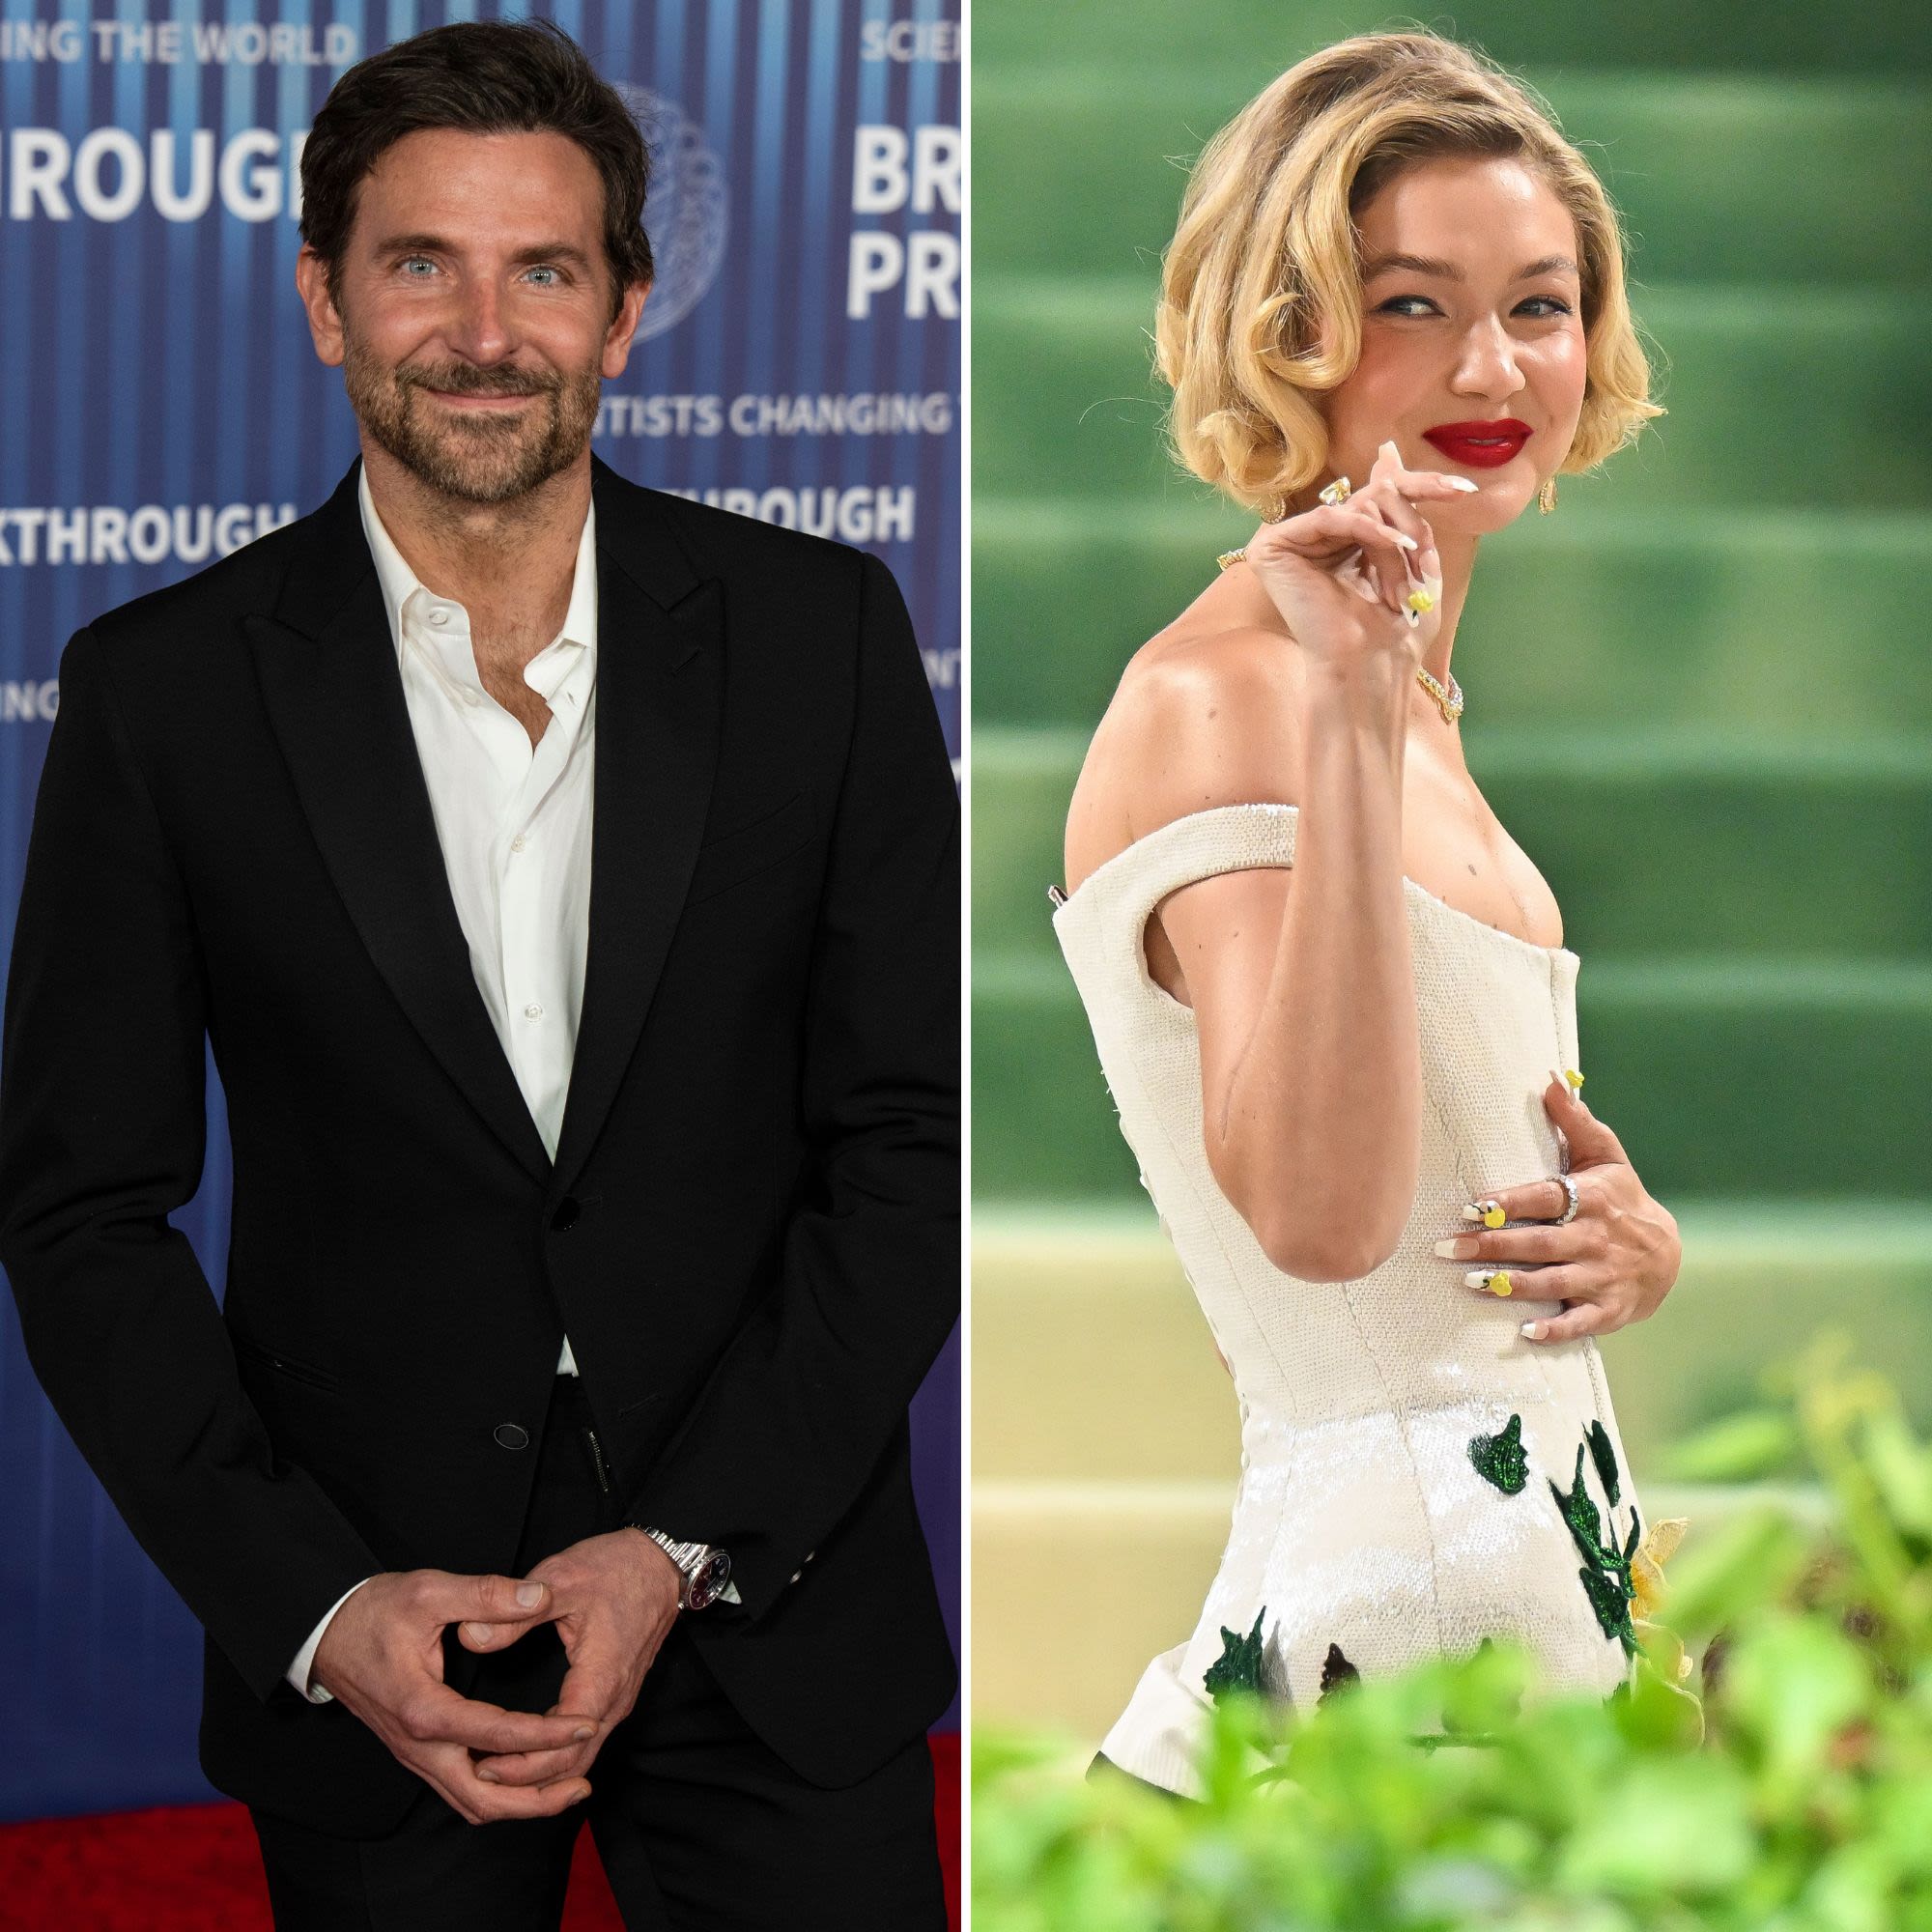 Bradley Cooper’s ‘Very Vocal’ About Wanting Another Kid Amid Gigi Hadid Romance: ‘Baby Mama Material’